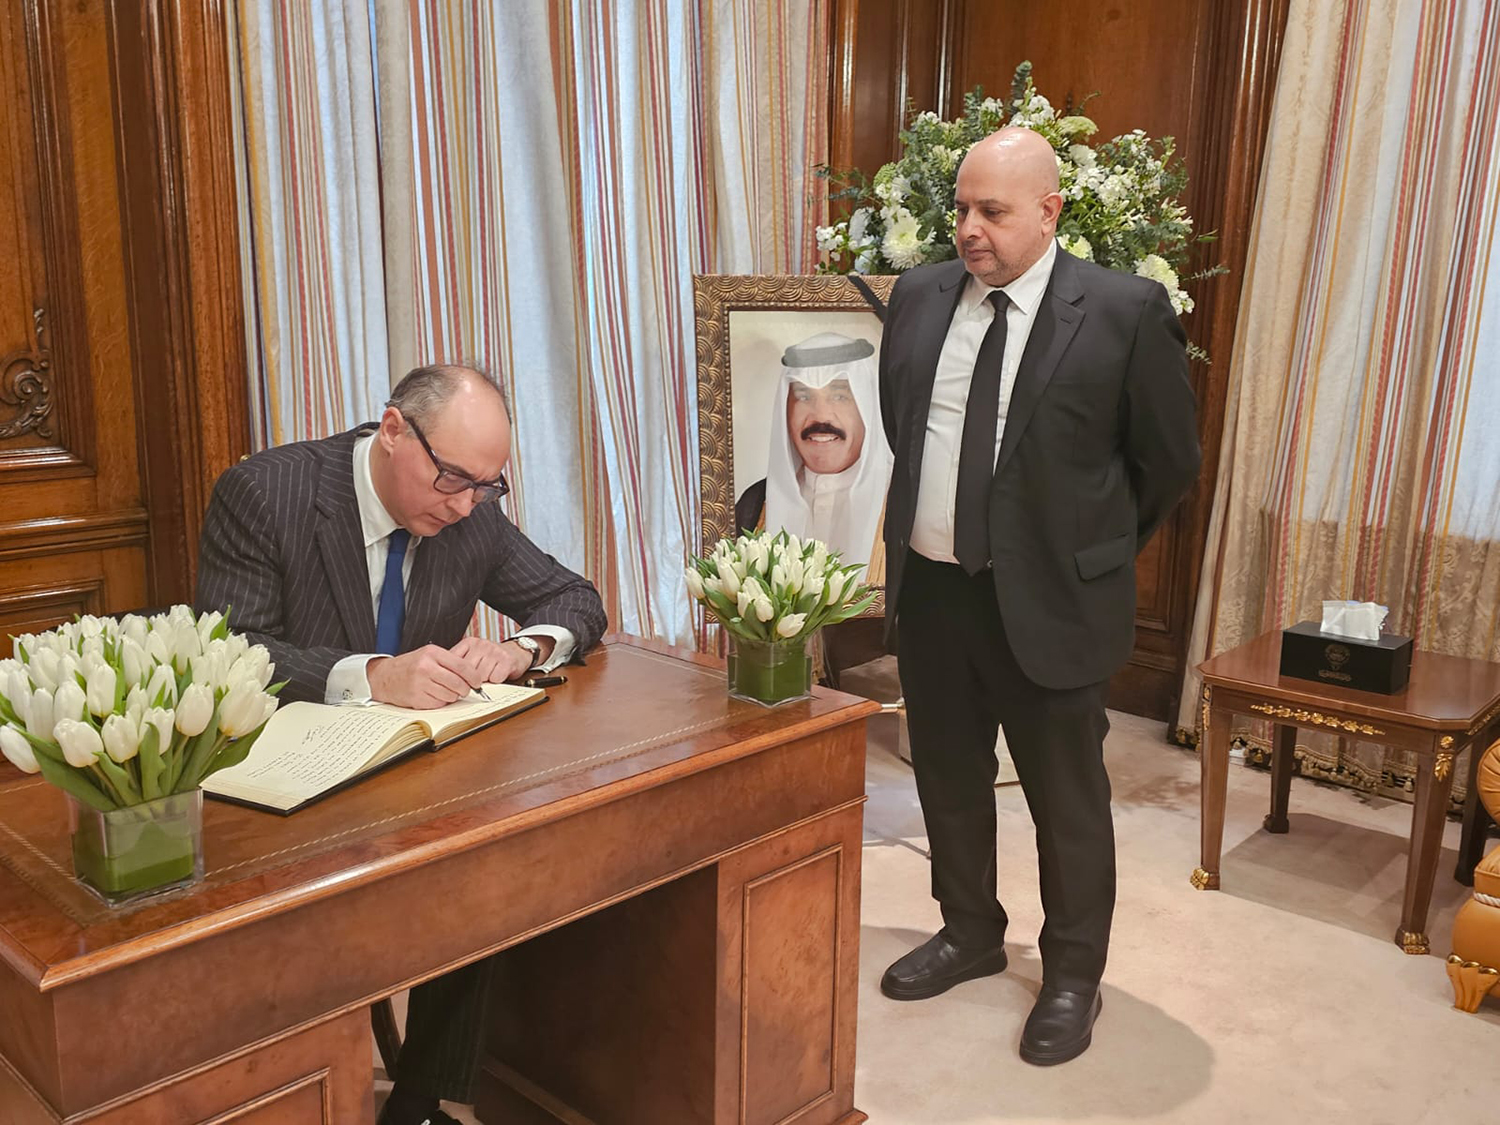 British State Minister for Investments, Lord Dominic Johnson offered his condolences at the Kuwaiti embassy in London